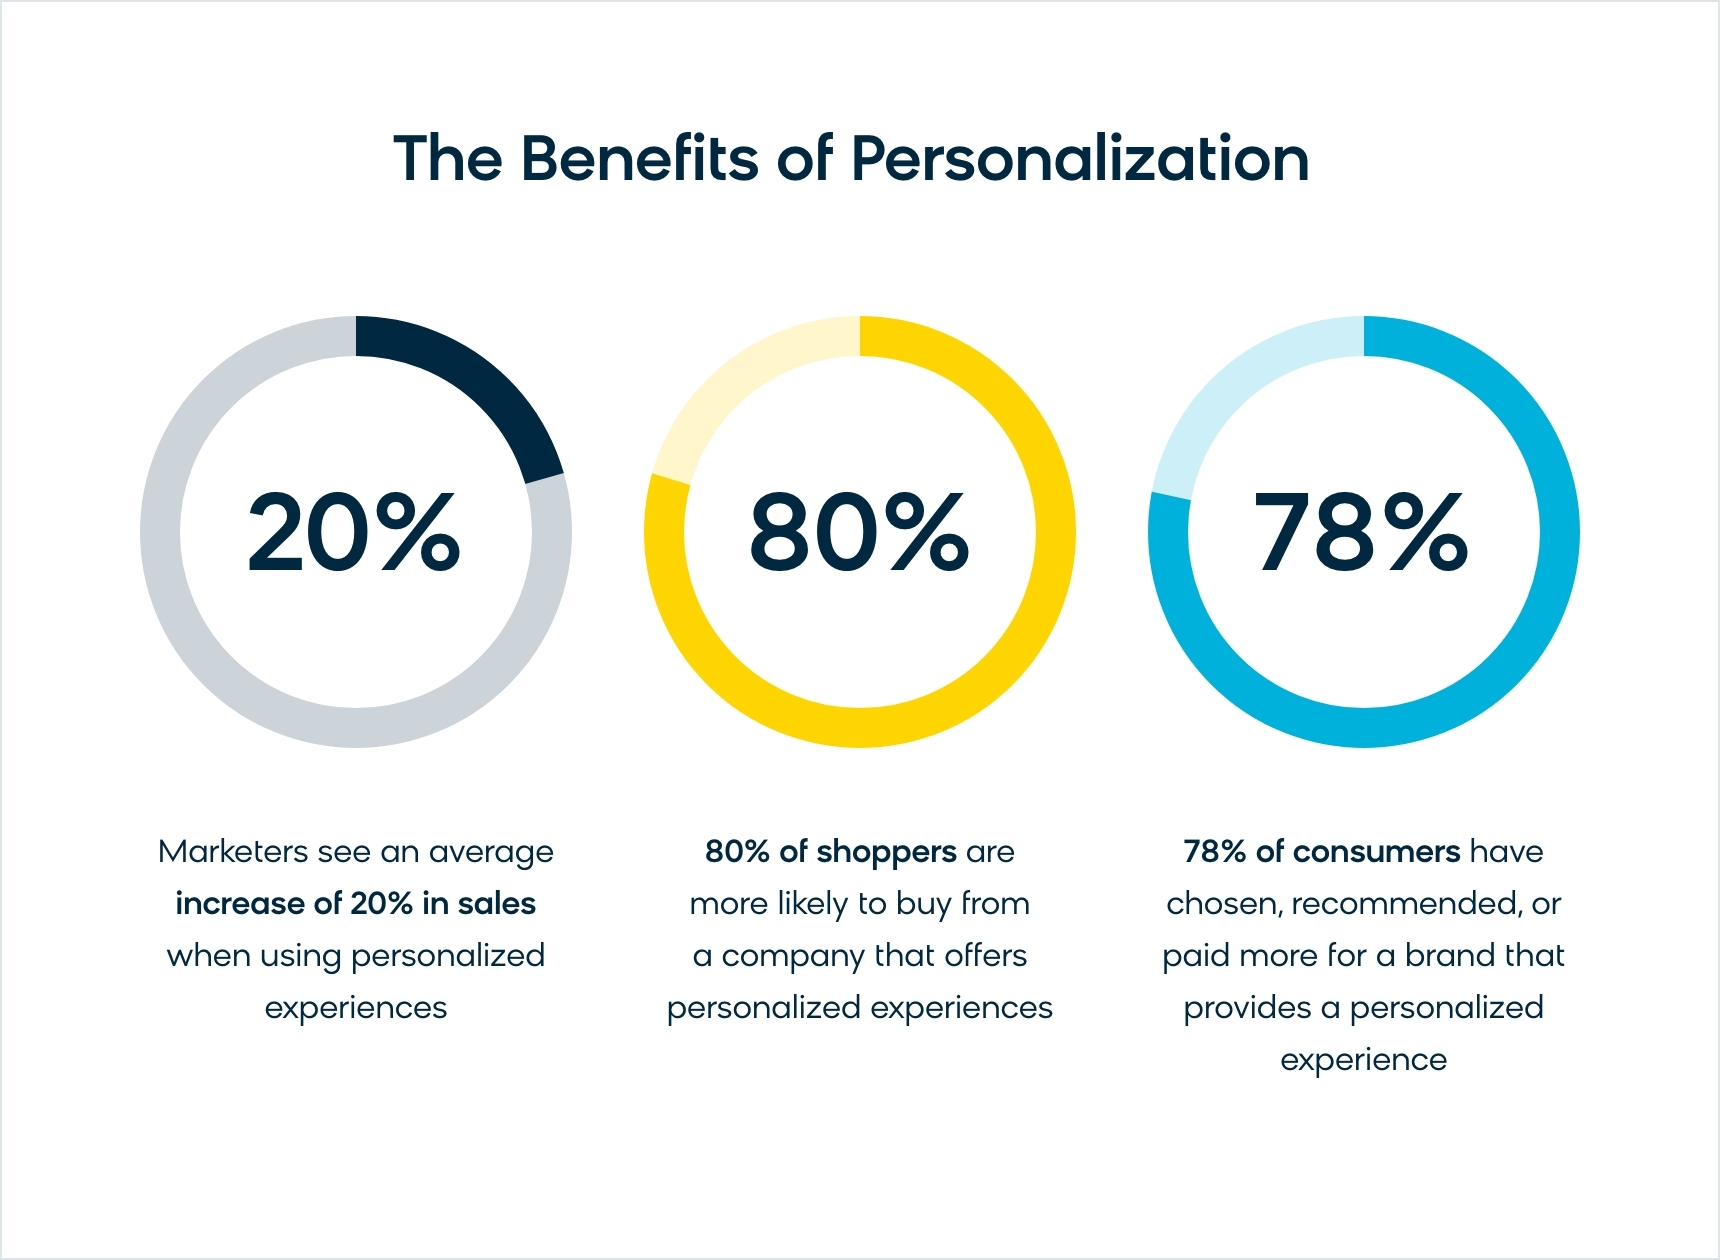 The benefits of personalization for ecommerce businesses include increased sales, loyal customers, and repeat purchases.